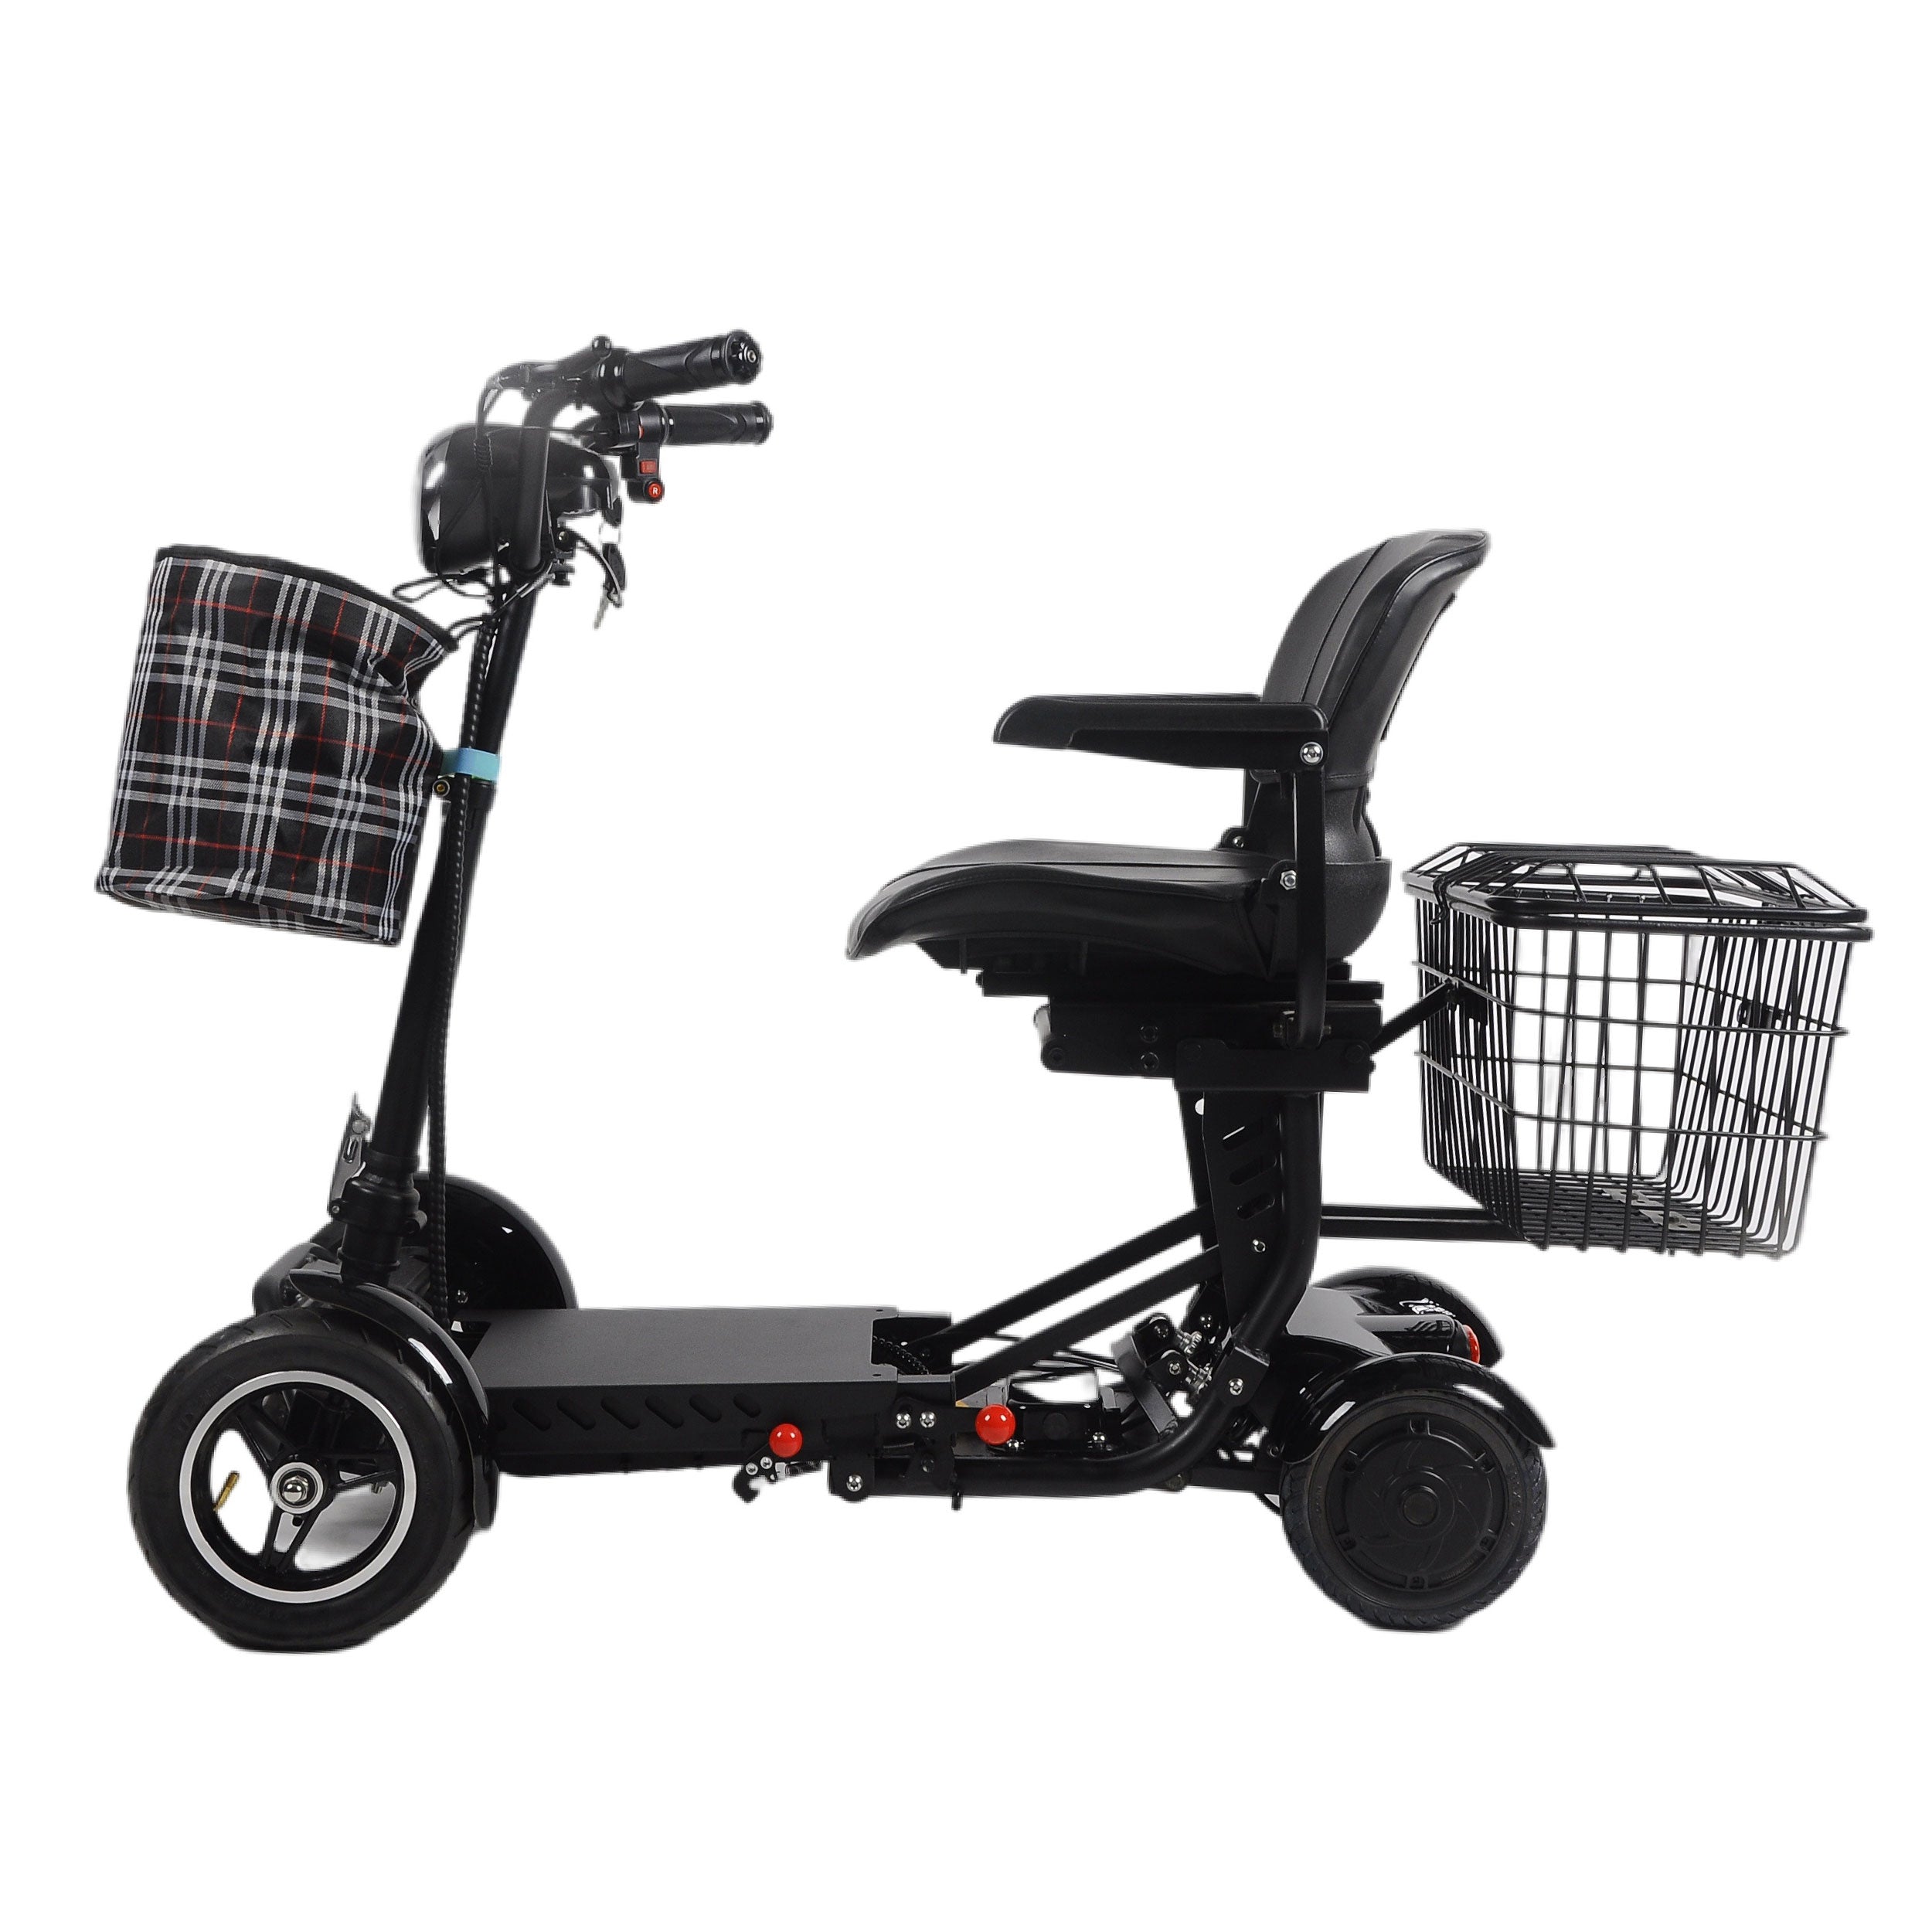 Rubicon FX medical scooter